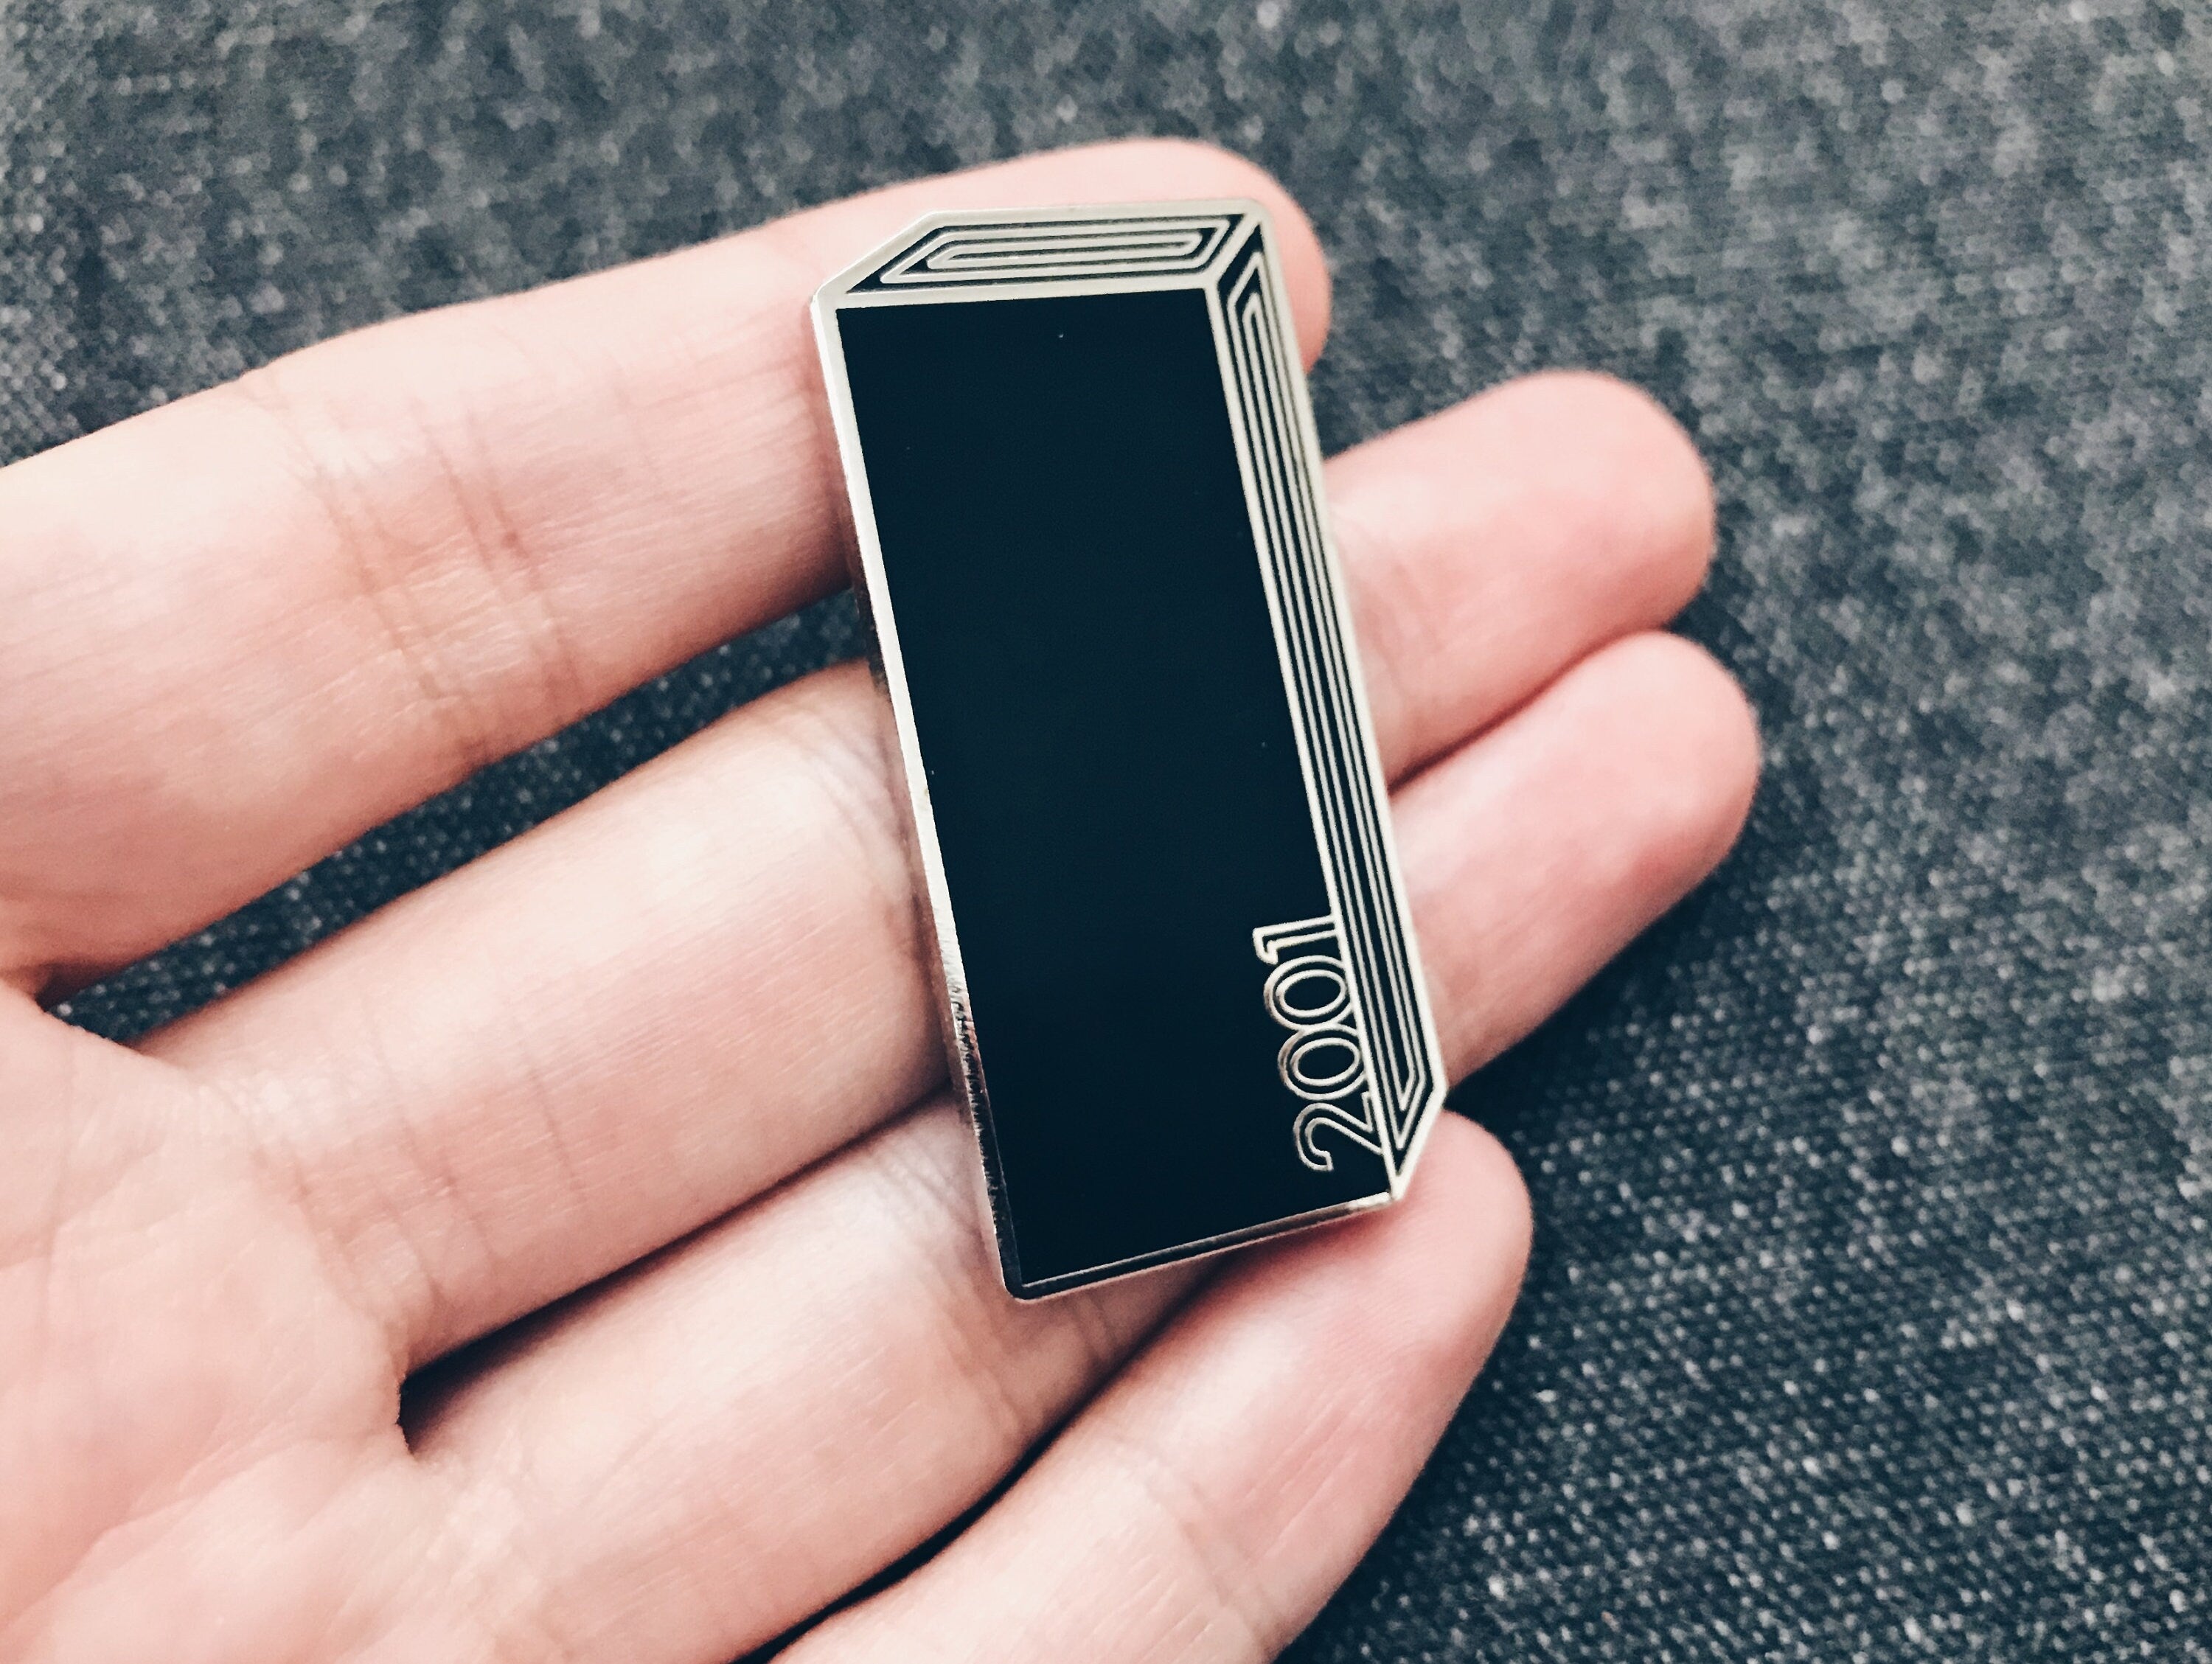 2001: A Monolith Enamel Pin - 2001 A Space Odyssey Lapel / Brooch Pin - Kubrick Science Fiction Gift